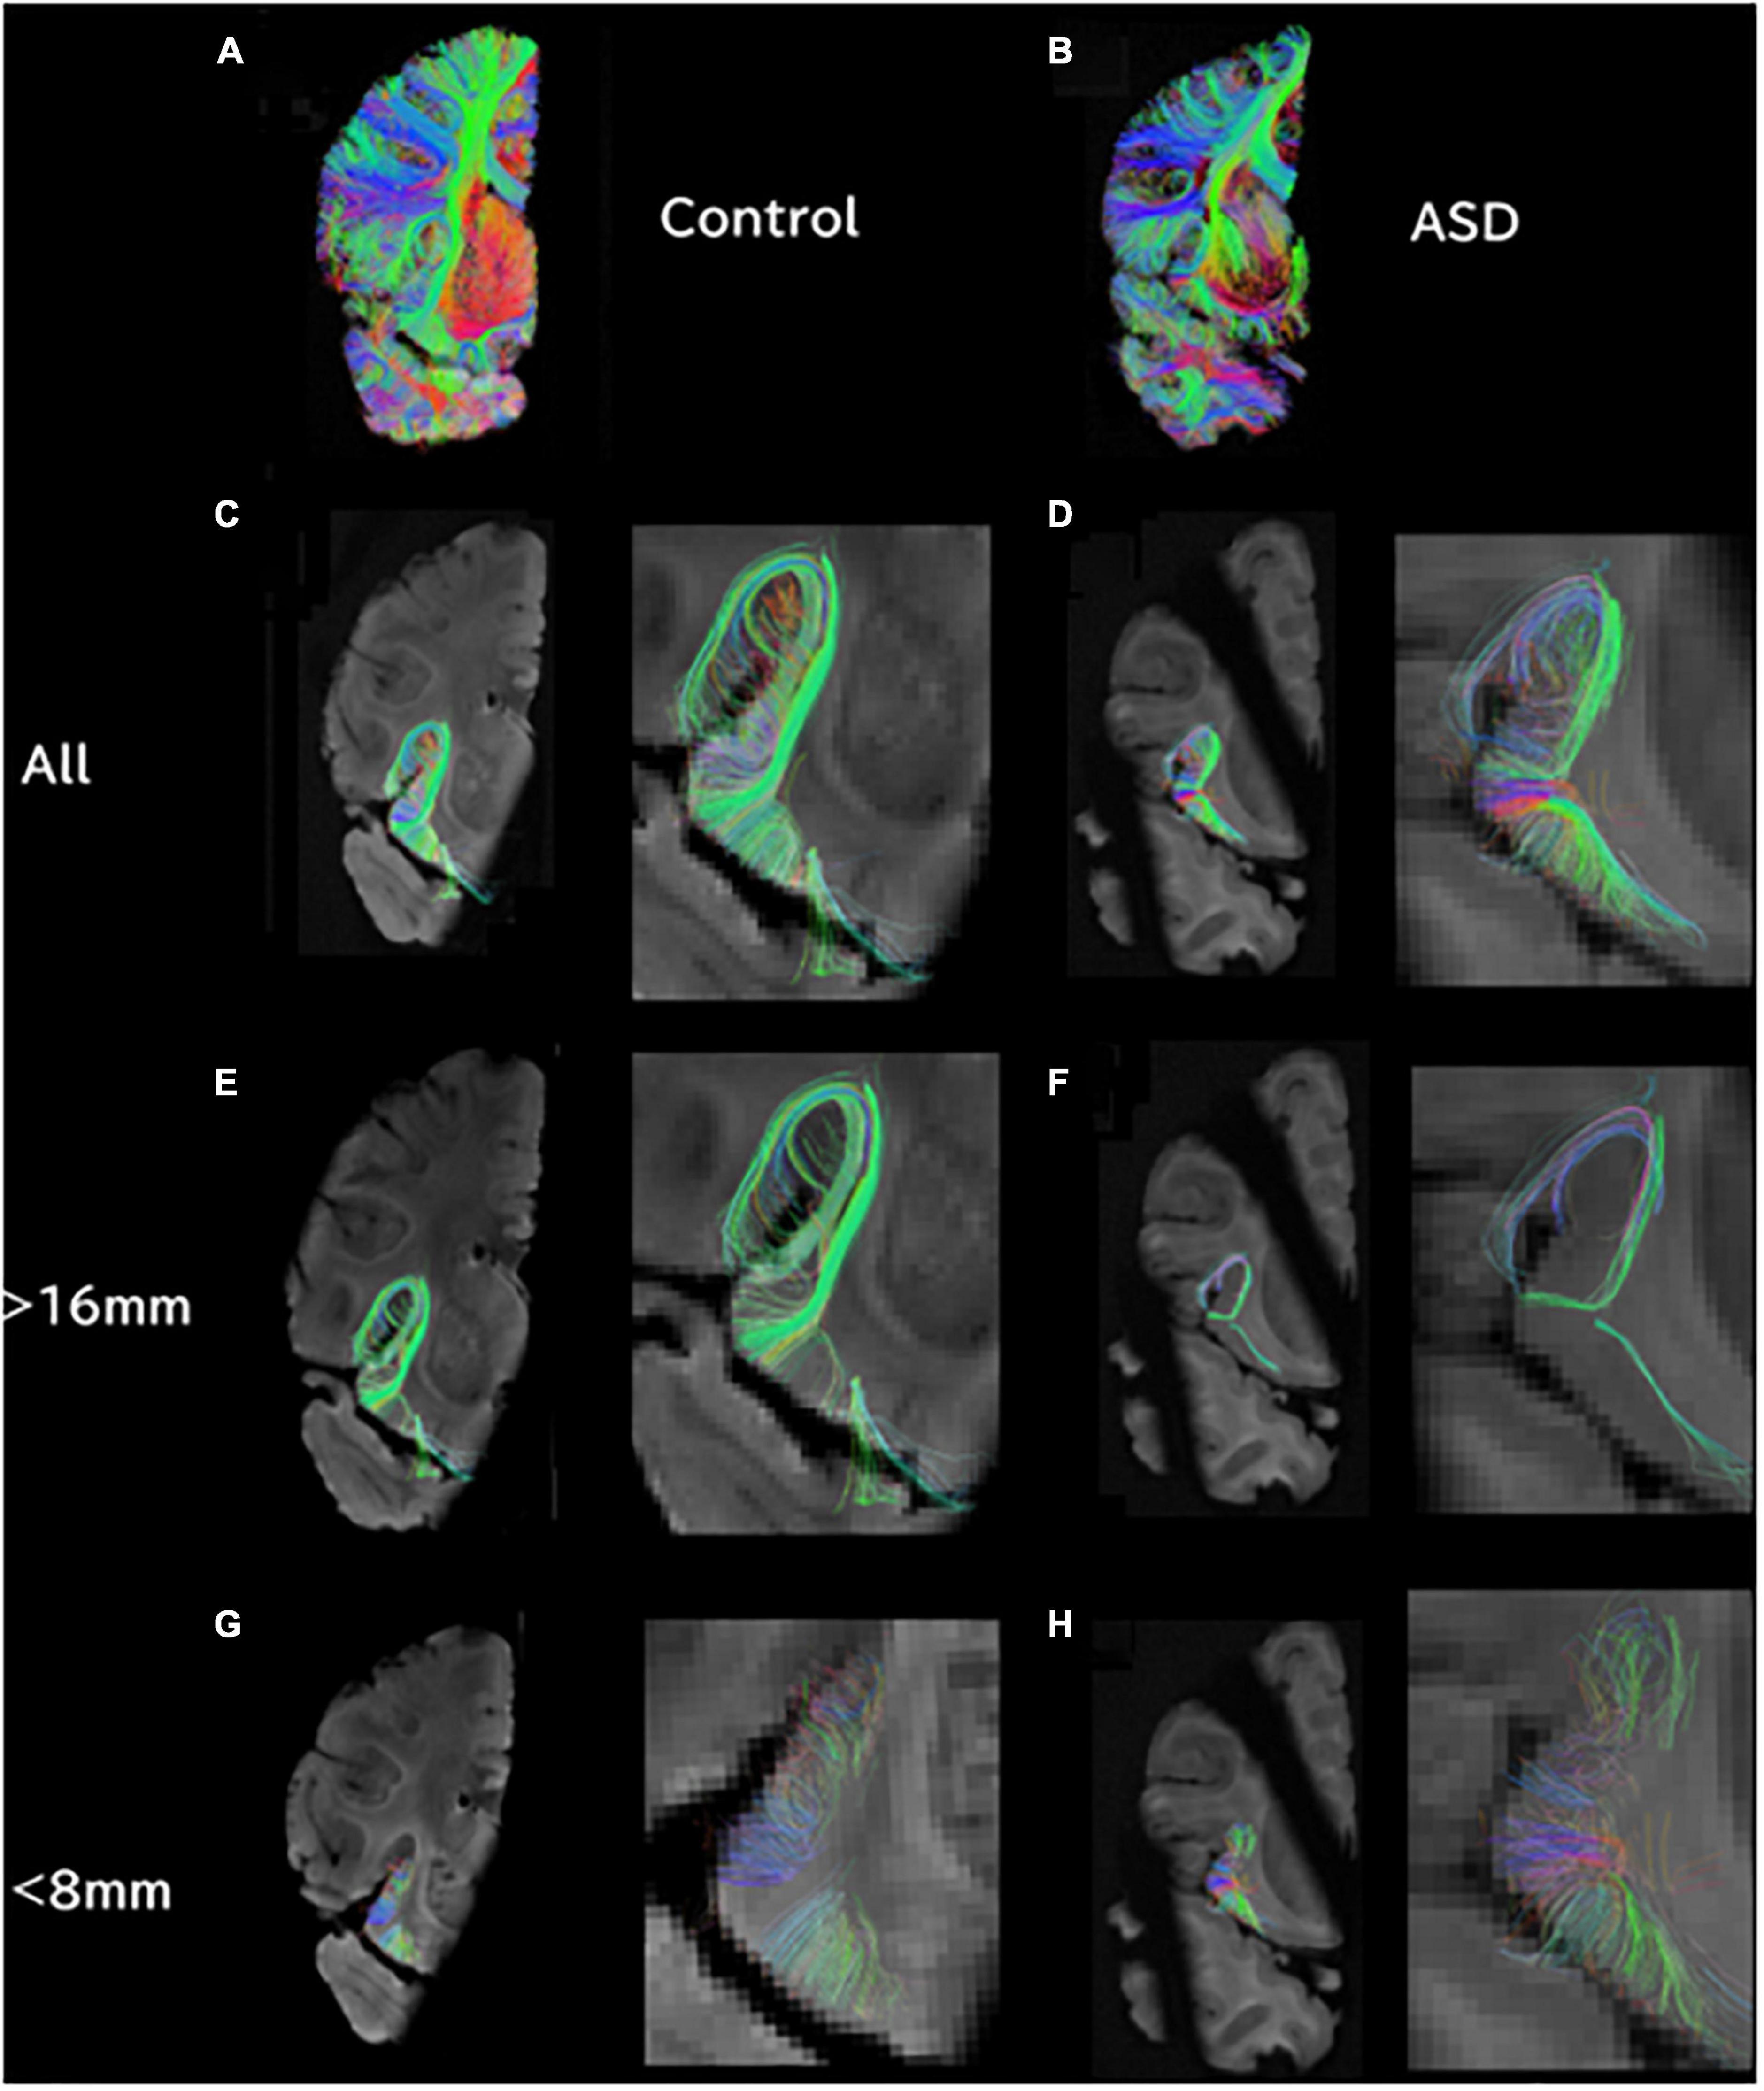 Integration of structural MRI and epigenetic analyses hint at linked cellular defects of the subventricular zone and insular cortex in autism: Findings from a case study